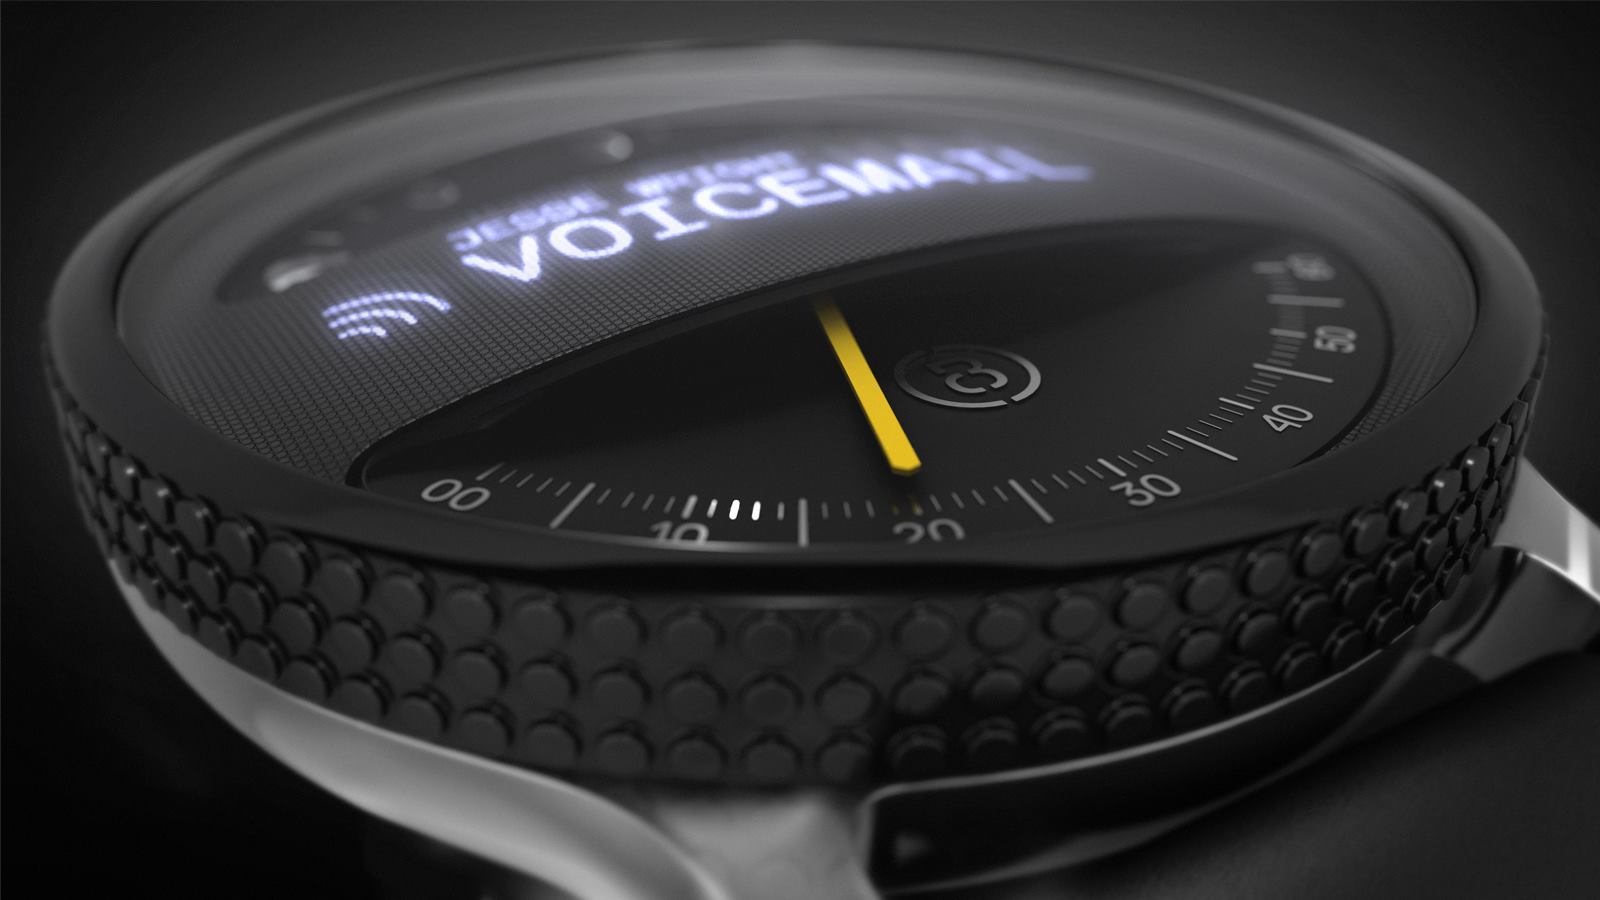 Animation of the Week: Span Smart Watch from Box Clever